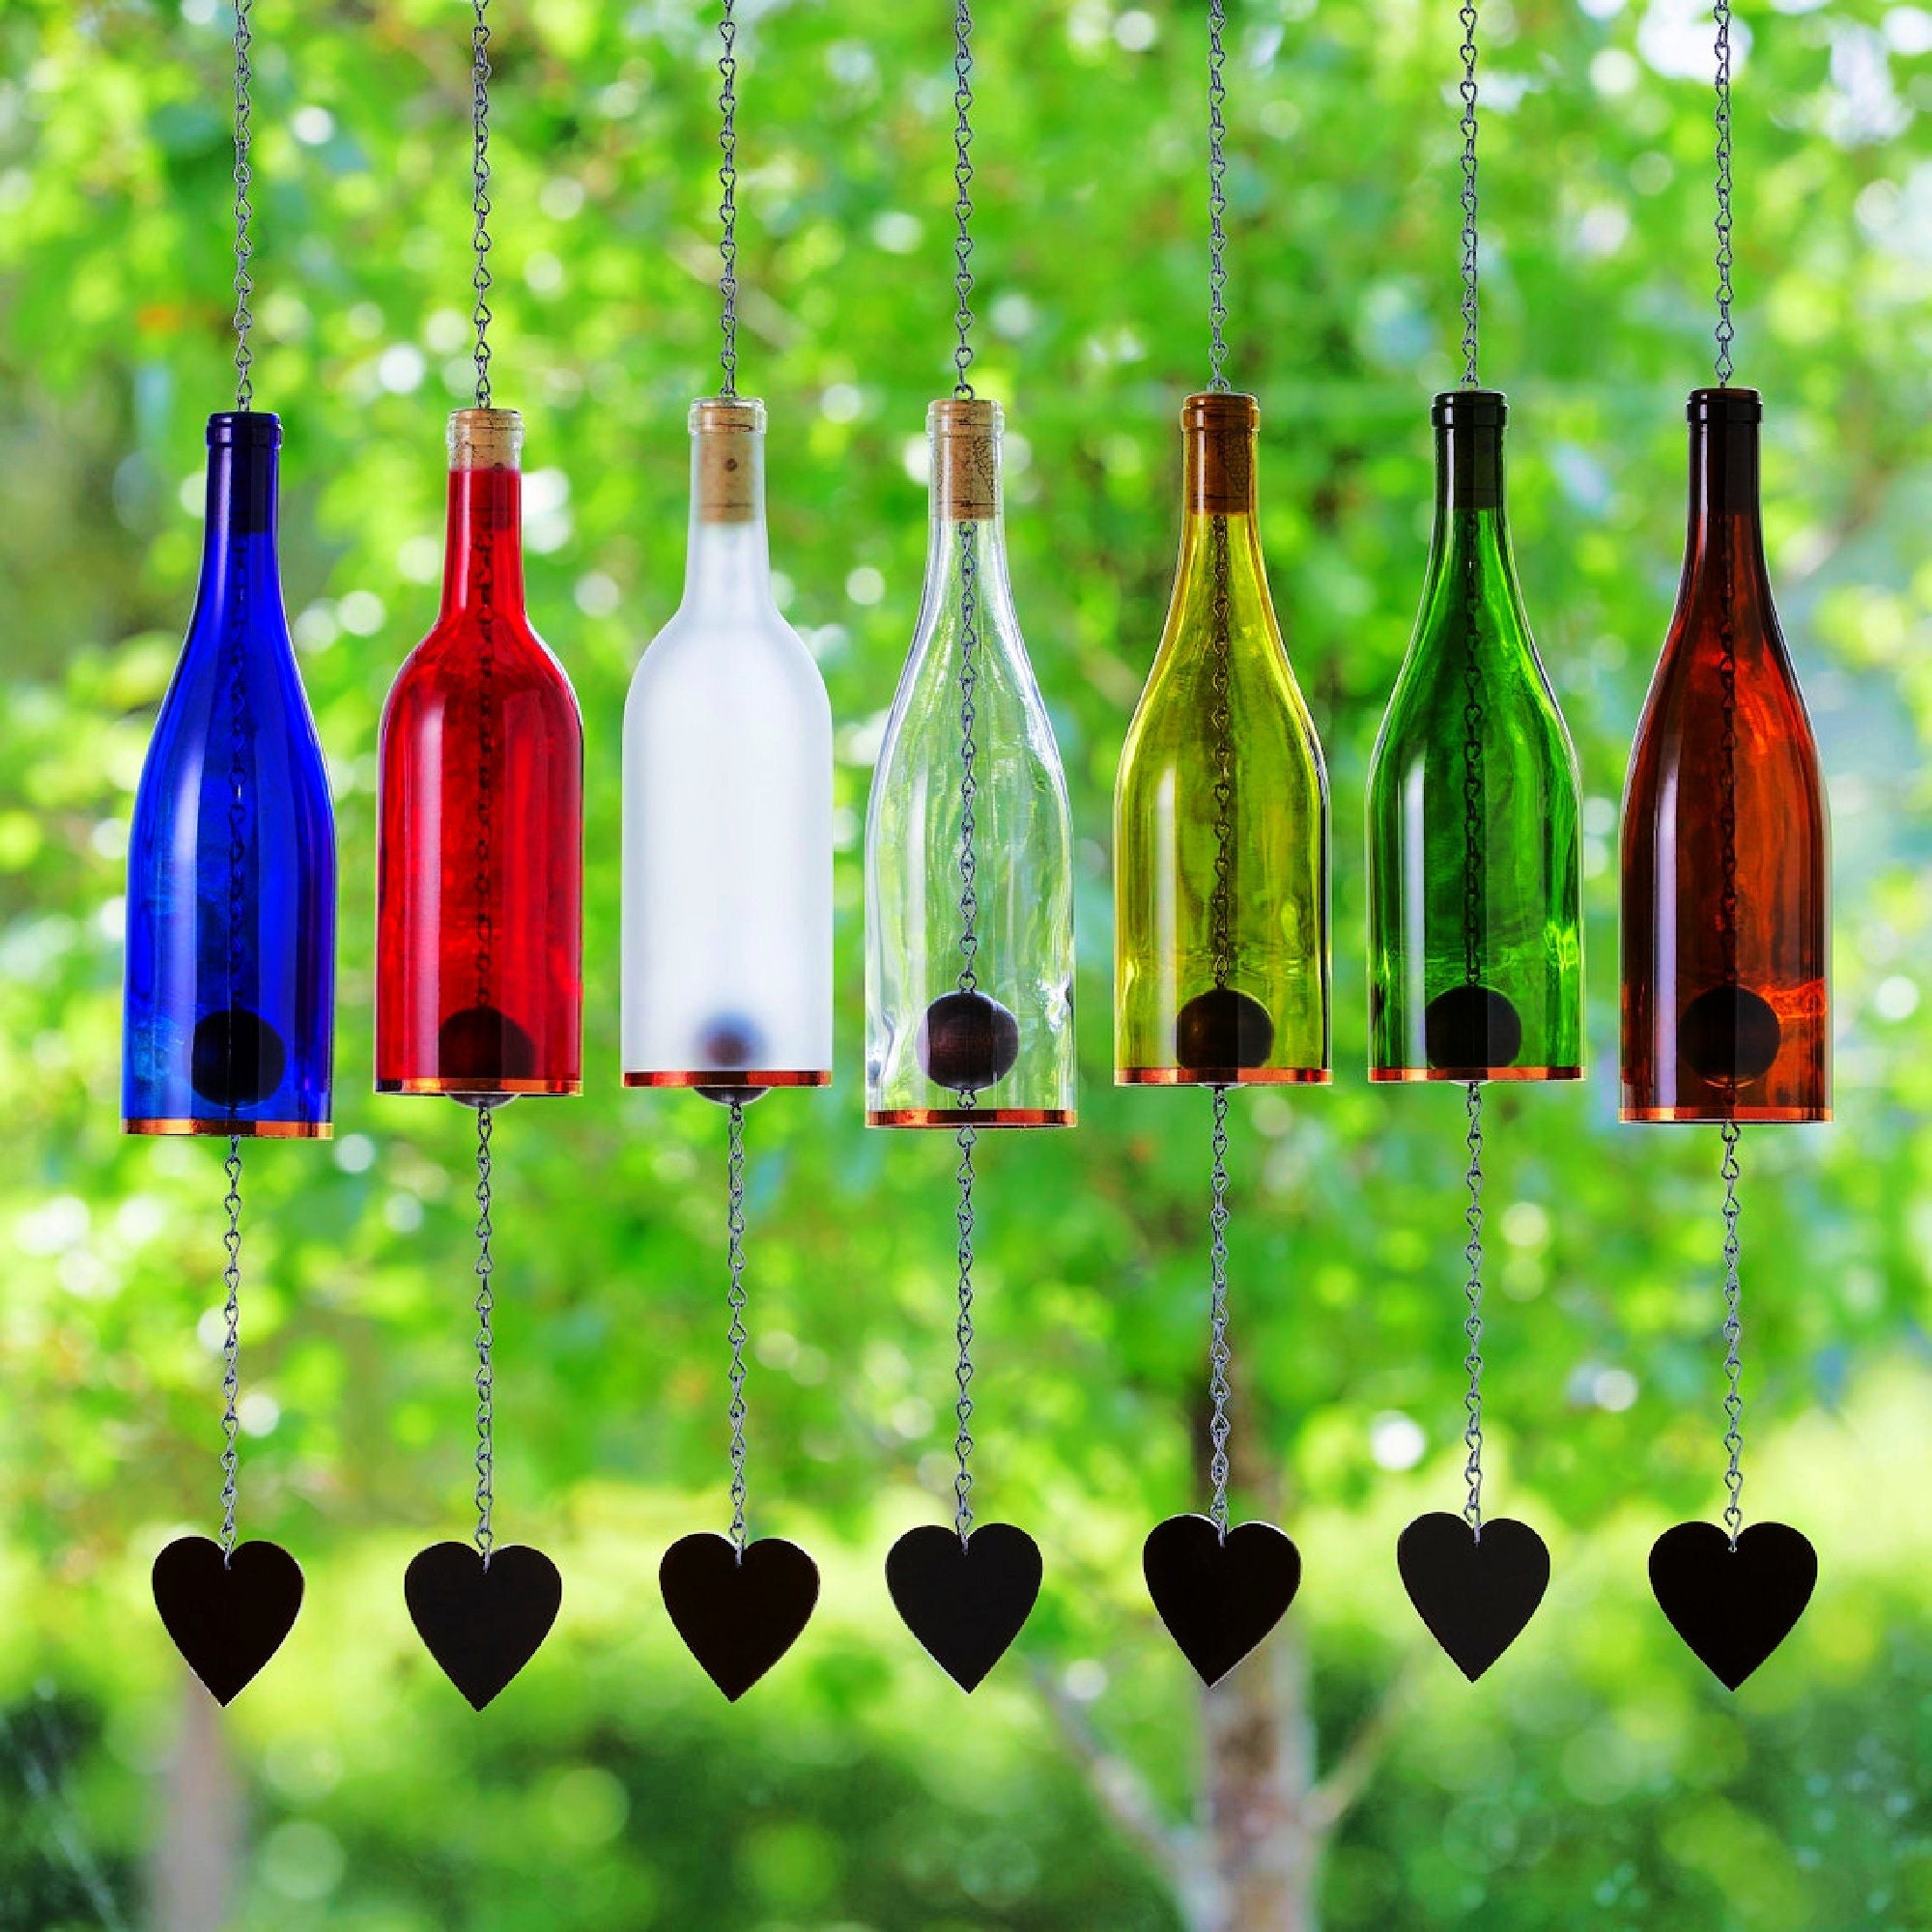 Wind Chimes Made From Glass Wine Bottles with Copper Trim Outdoor Garden Patio Decor Unique Wine Gift Home Decor